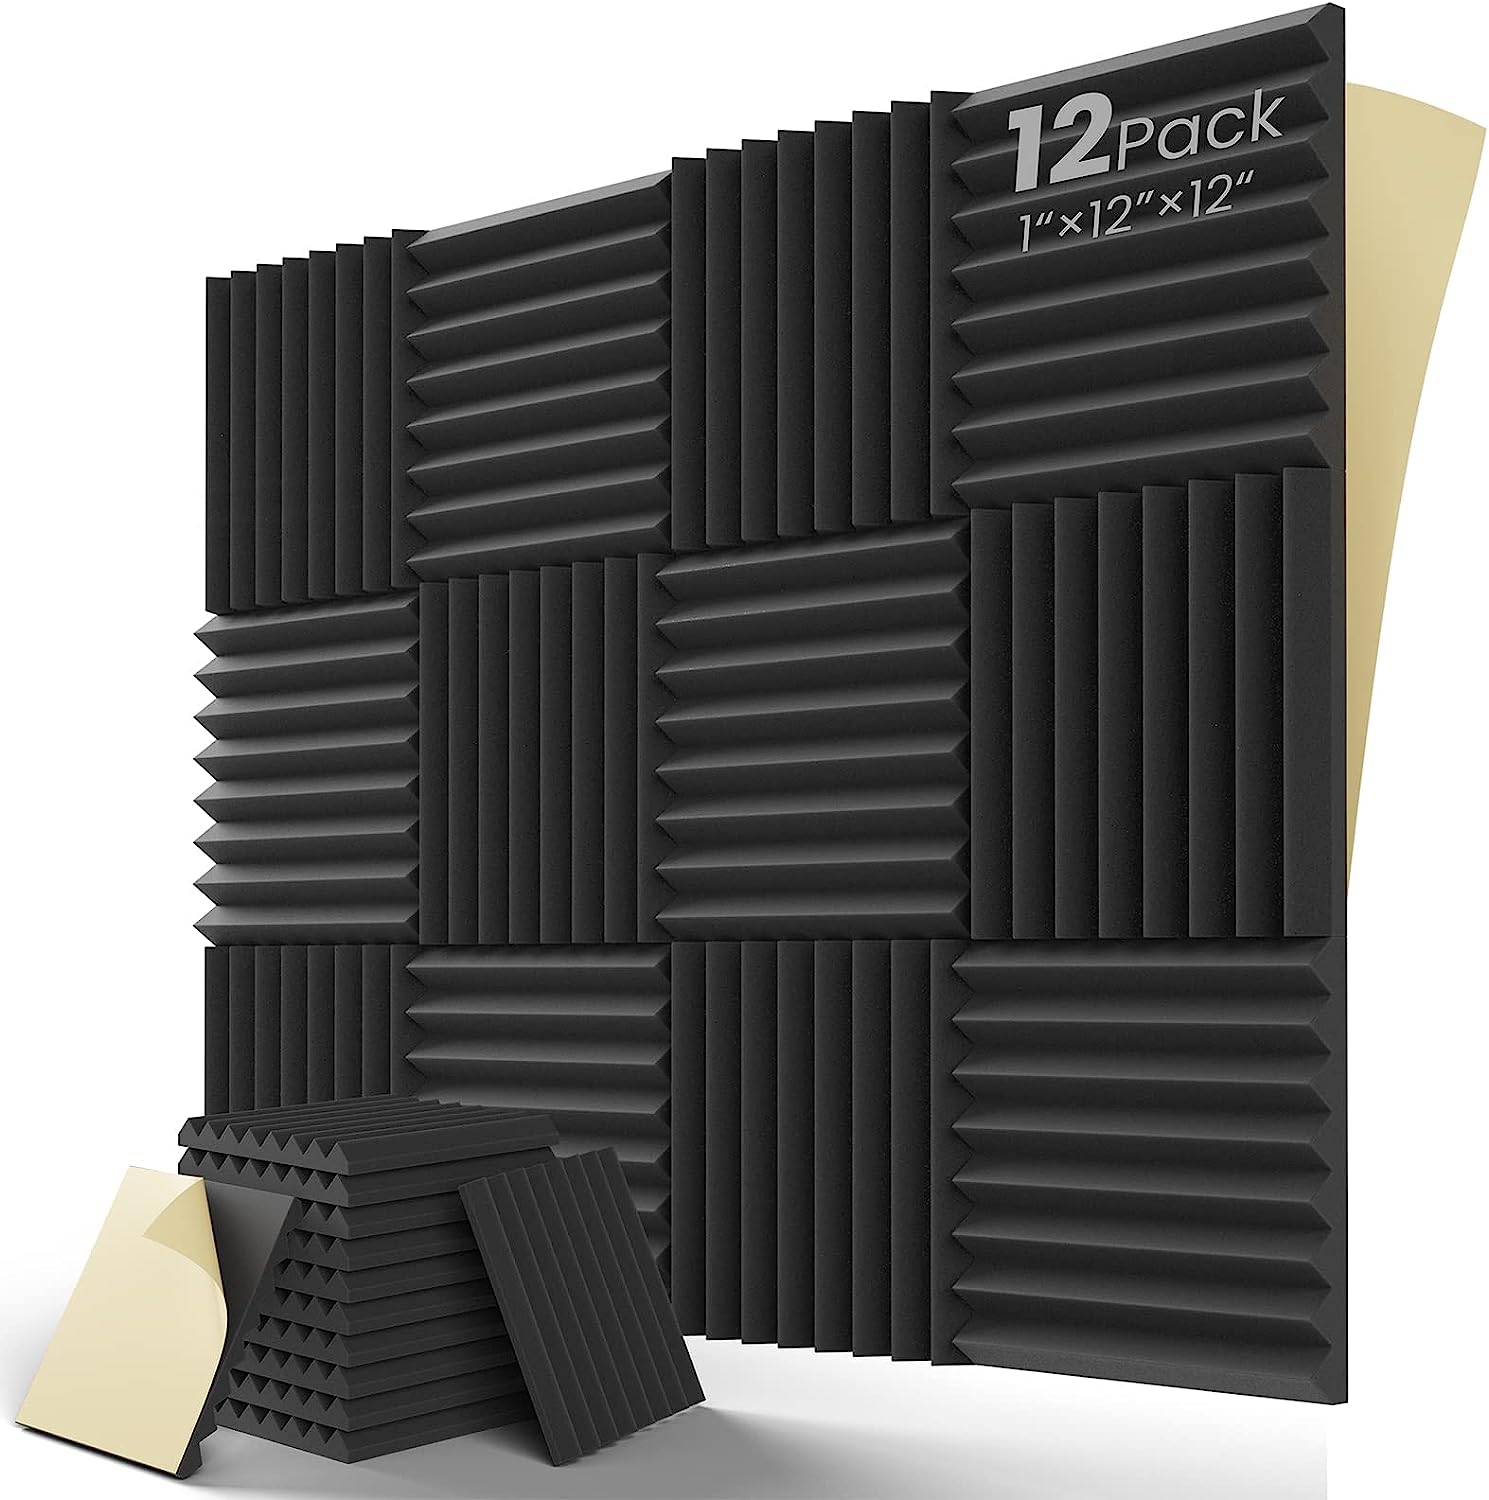 LEIYER Upgrade 12 pack Sound Proof Foam Panels With [...]